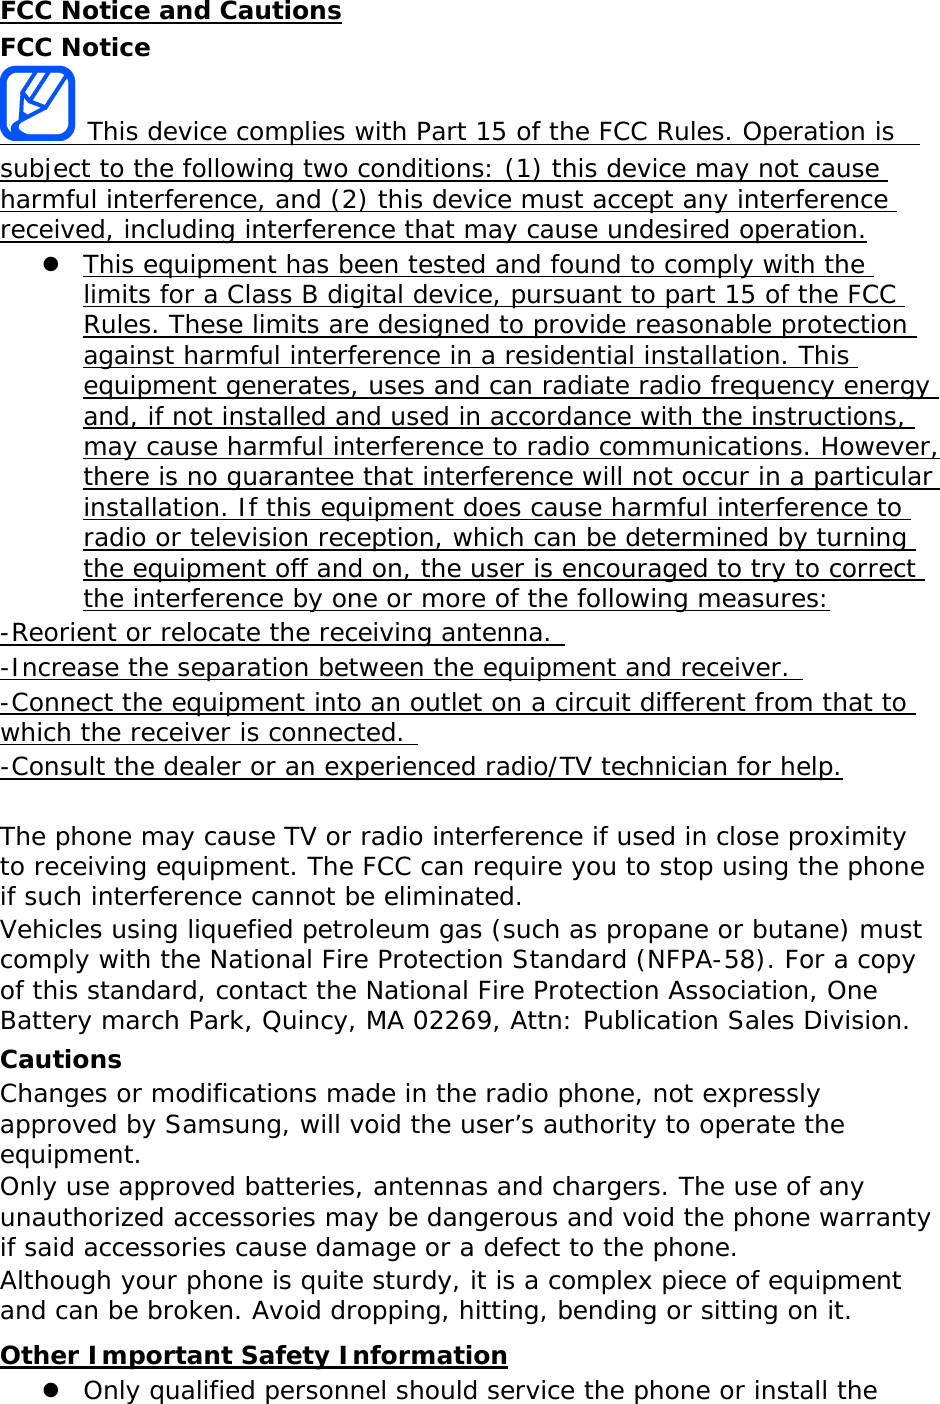 FCC Notice and Cautions FCC Notice  This device complies with Part 15 of the FCC Rules. Operation is  subject to the following two conditions: (1) this device may not cause harmful interference, and (2) this device must accept any interference received, including interference that may cause undesired operation. z This equipment has been tested and found to comply with the limits for a Class B digital device, pursuant to part 15 of the FCC Rules. These limits are designed to provide reasonable protection against harmful interference in a residential installation. This equipment generates, uses and can radiate radio frequency energy and, if not installed and used in accordance with the instructions, may cause harmful interference to radio communications. However, there is no guarantee that interference will not occur in a particular installation. If this equipment does cause harmful interference to radio or television reception, which can be determined by turning the equipment off and on, the user is encouraged to try to correct the interference by one or more of the following measures: -Reorient or relocate the receiving antenna.  -Increase the separation between the equipment and receiver.  -Connect the equipment into an outlet on a circuit different from that to which the receiver is connected.  -Consult the dealer or an experienced radio/TV technician for help.  The phone may cause TV or radio interference if used in close proximity to receiving equipment. The FCC can require you to stop using the phone if such interference cannot be eliminated. Vehicles using liquefied petroleum gas (such as propane or butane) must comply with the National Fire Protection Standard (NFPA-58). For a copy of this standard, contact the National Fire Protection Association, One Battery march Park, Quincy, MA 02269, Attn: Publication Sales Division. Cautions Changes or modifications made in the radio phone, not expressly approved by Samsung, will void the user’s authority to operate the equipment. Only use approved batteries, antennas and chargers. The use of any unauthorized accessories may be dangerous and void the phone warranty if said accessories cause damage or a defect to the phone. Although your phone is quite sturdy, it is a complex piece of equipment and can be broken. Avoid dropping, hitting, bending or sitting on it. Other Important Safety Information z Only qualified personnel should service the phone or install the 